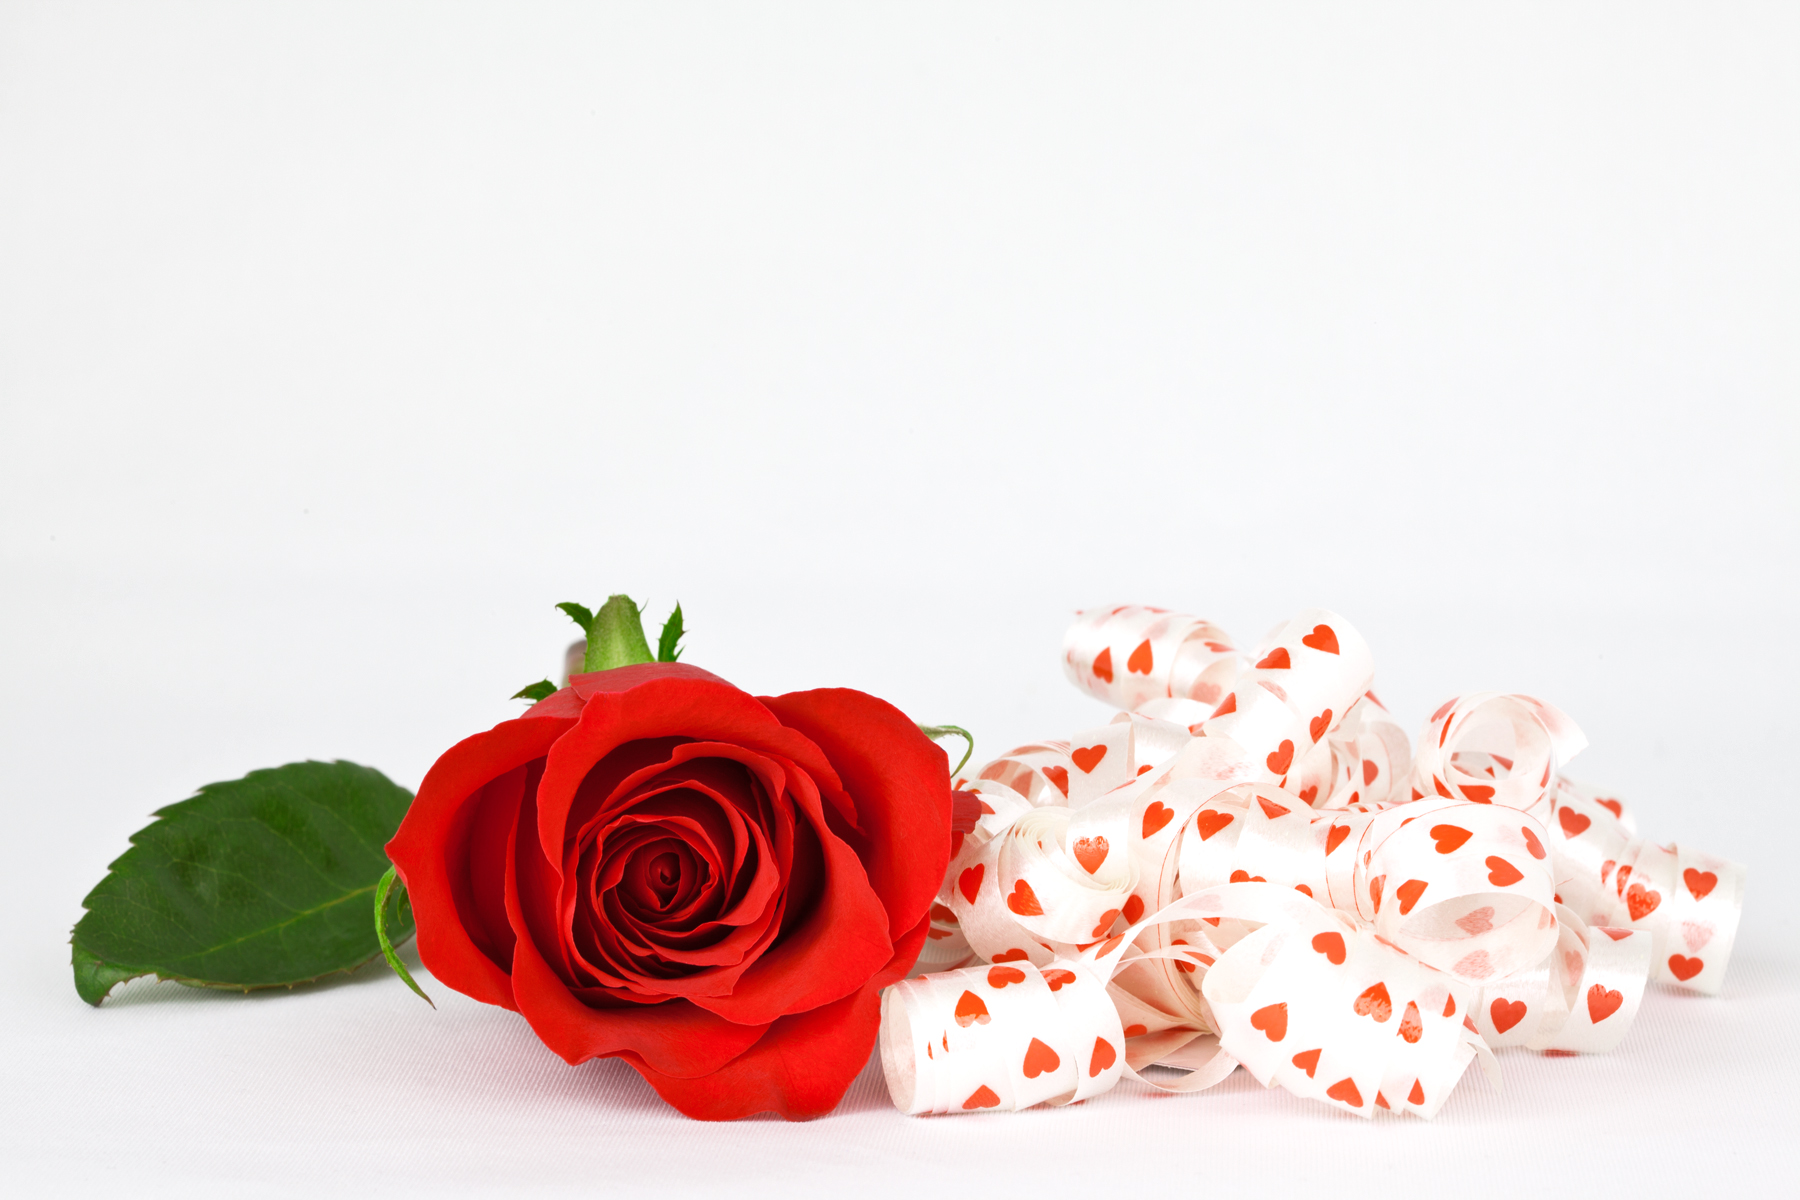 Red rose and ribbons photo